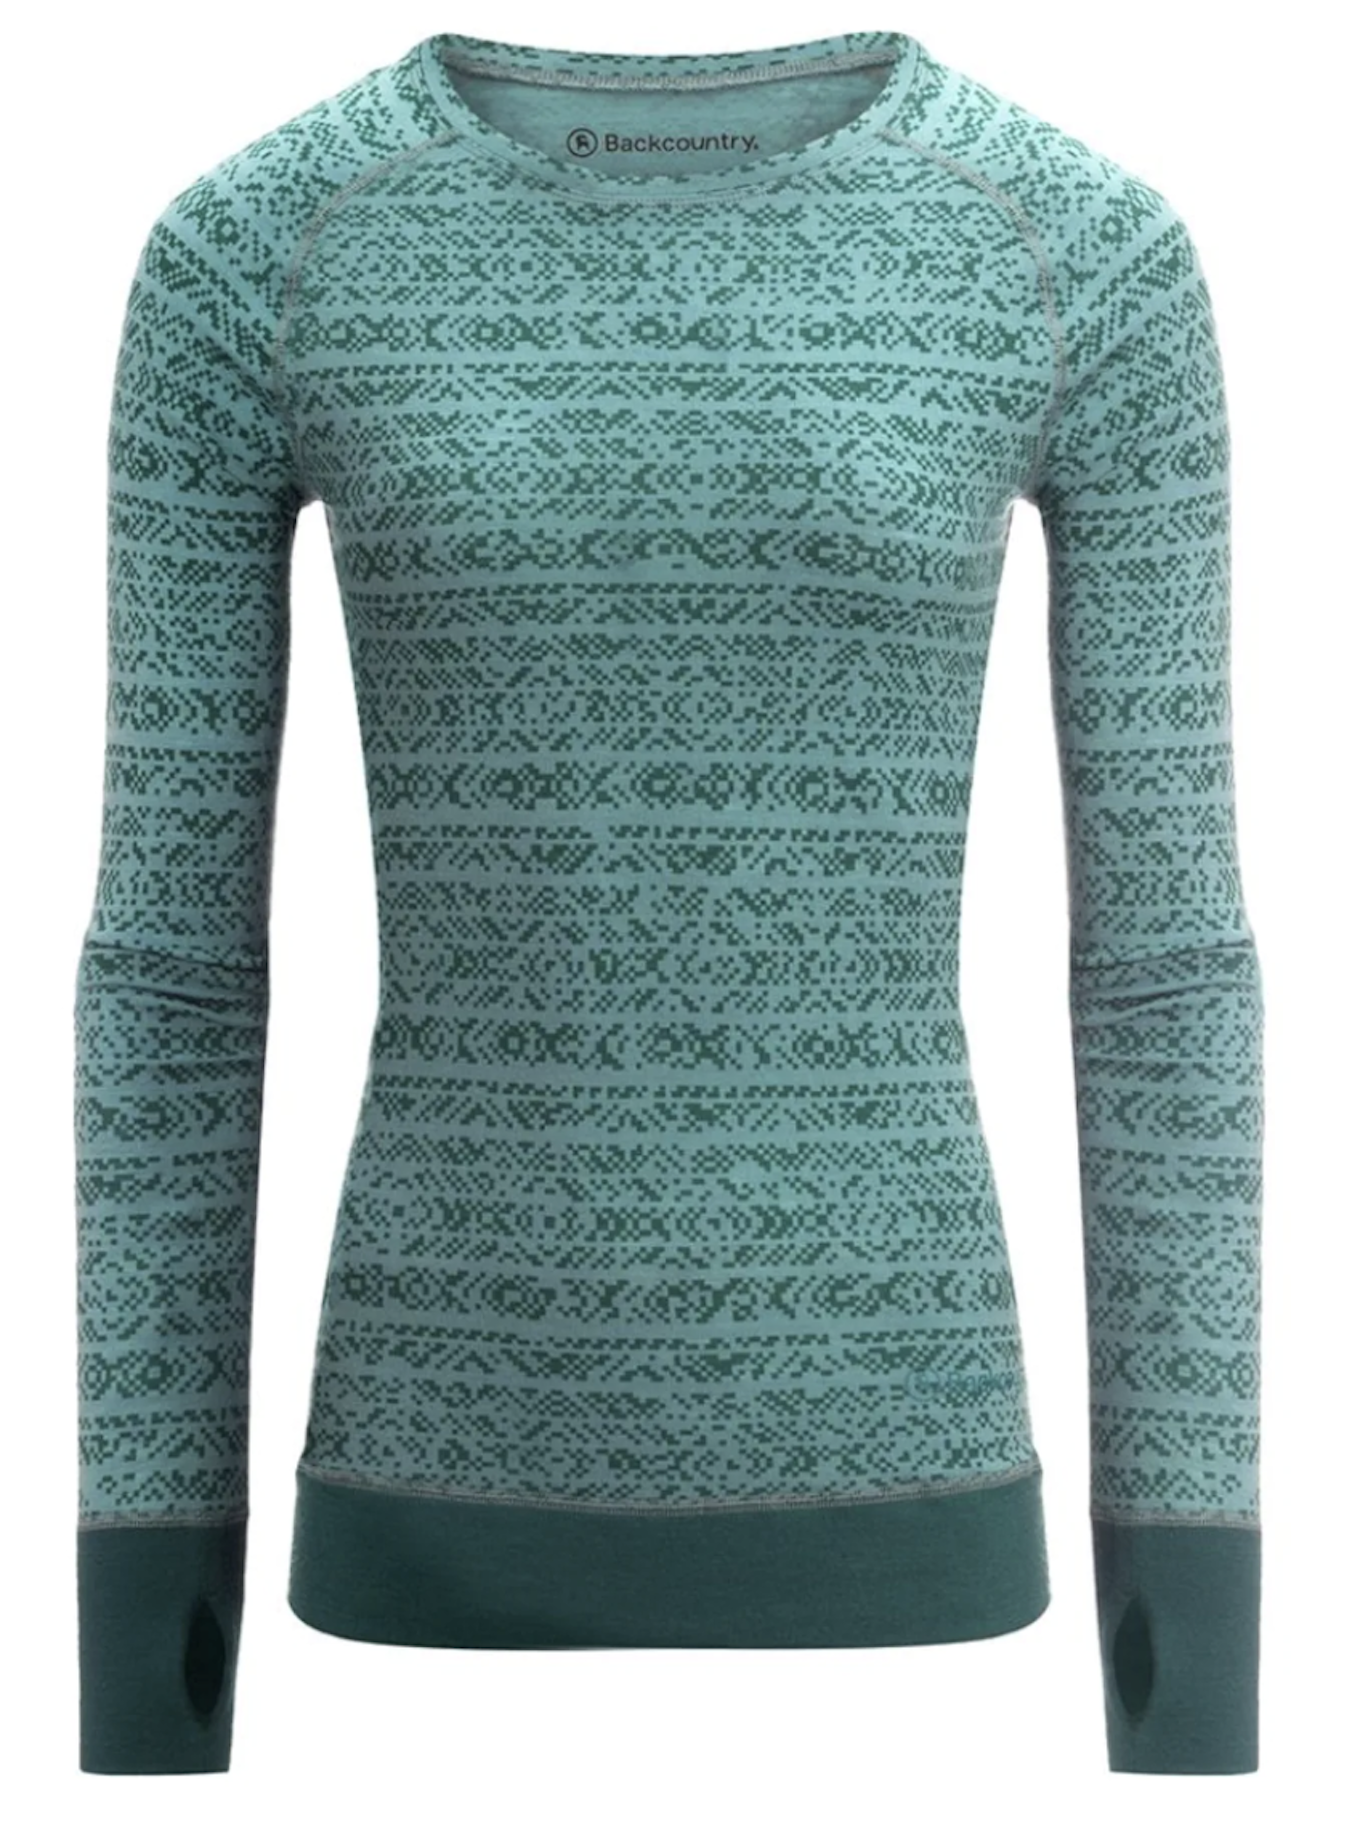 5 Women's Base Layer Tops You'll Love